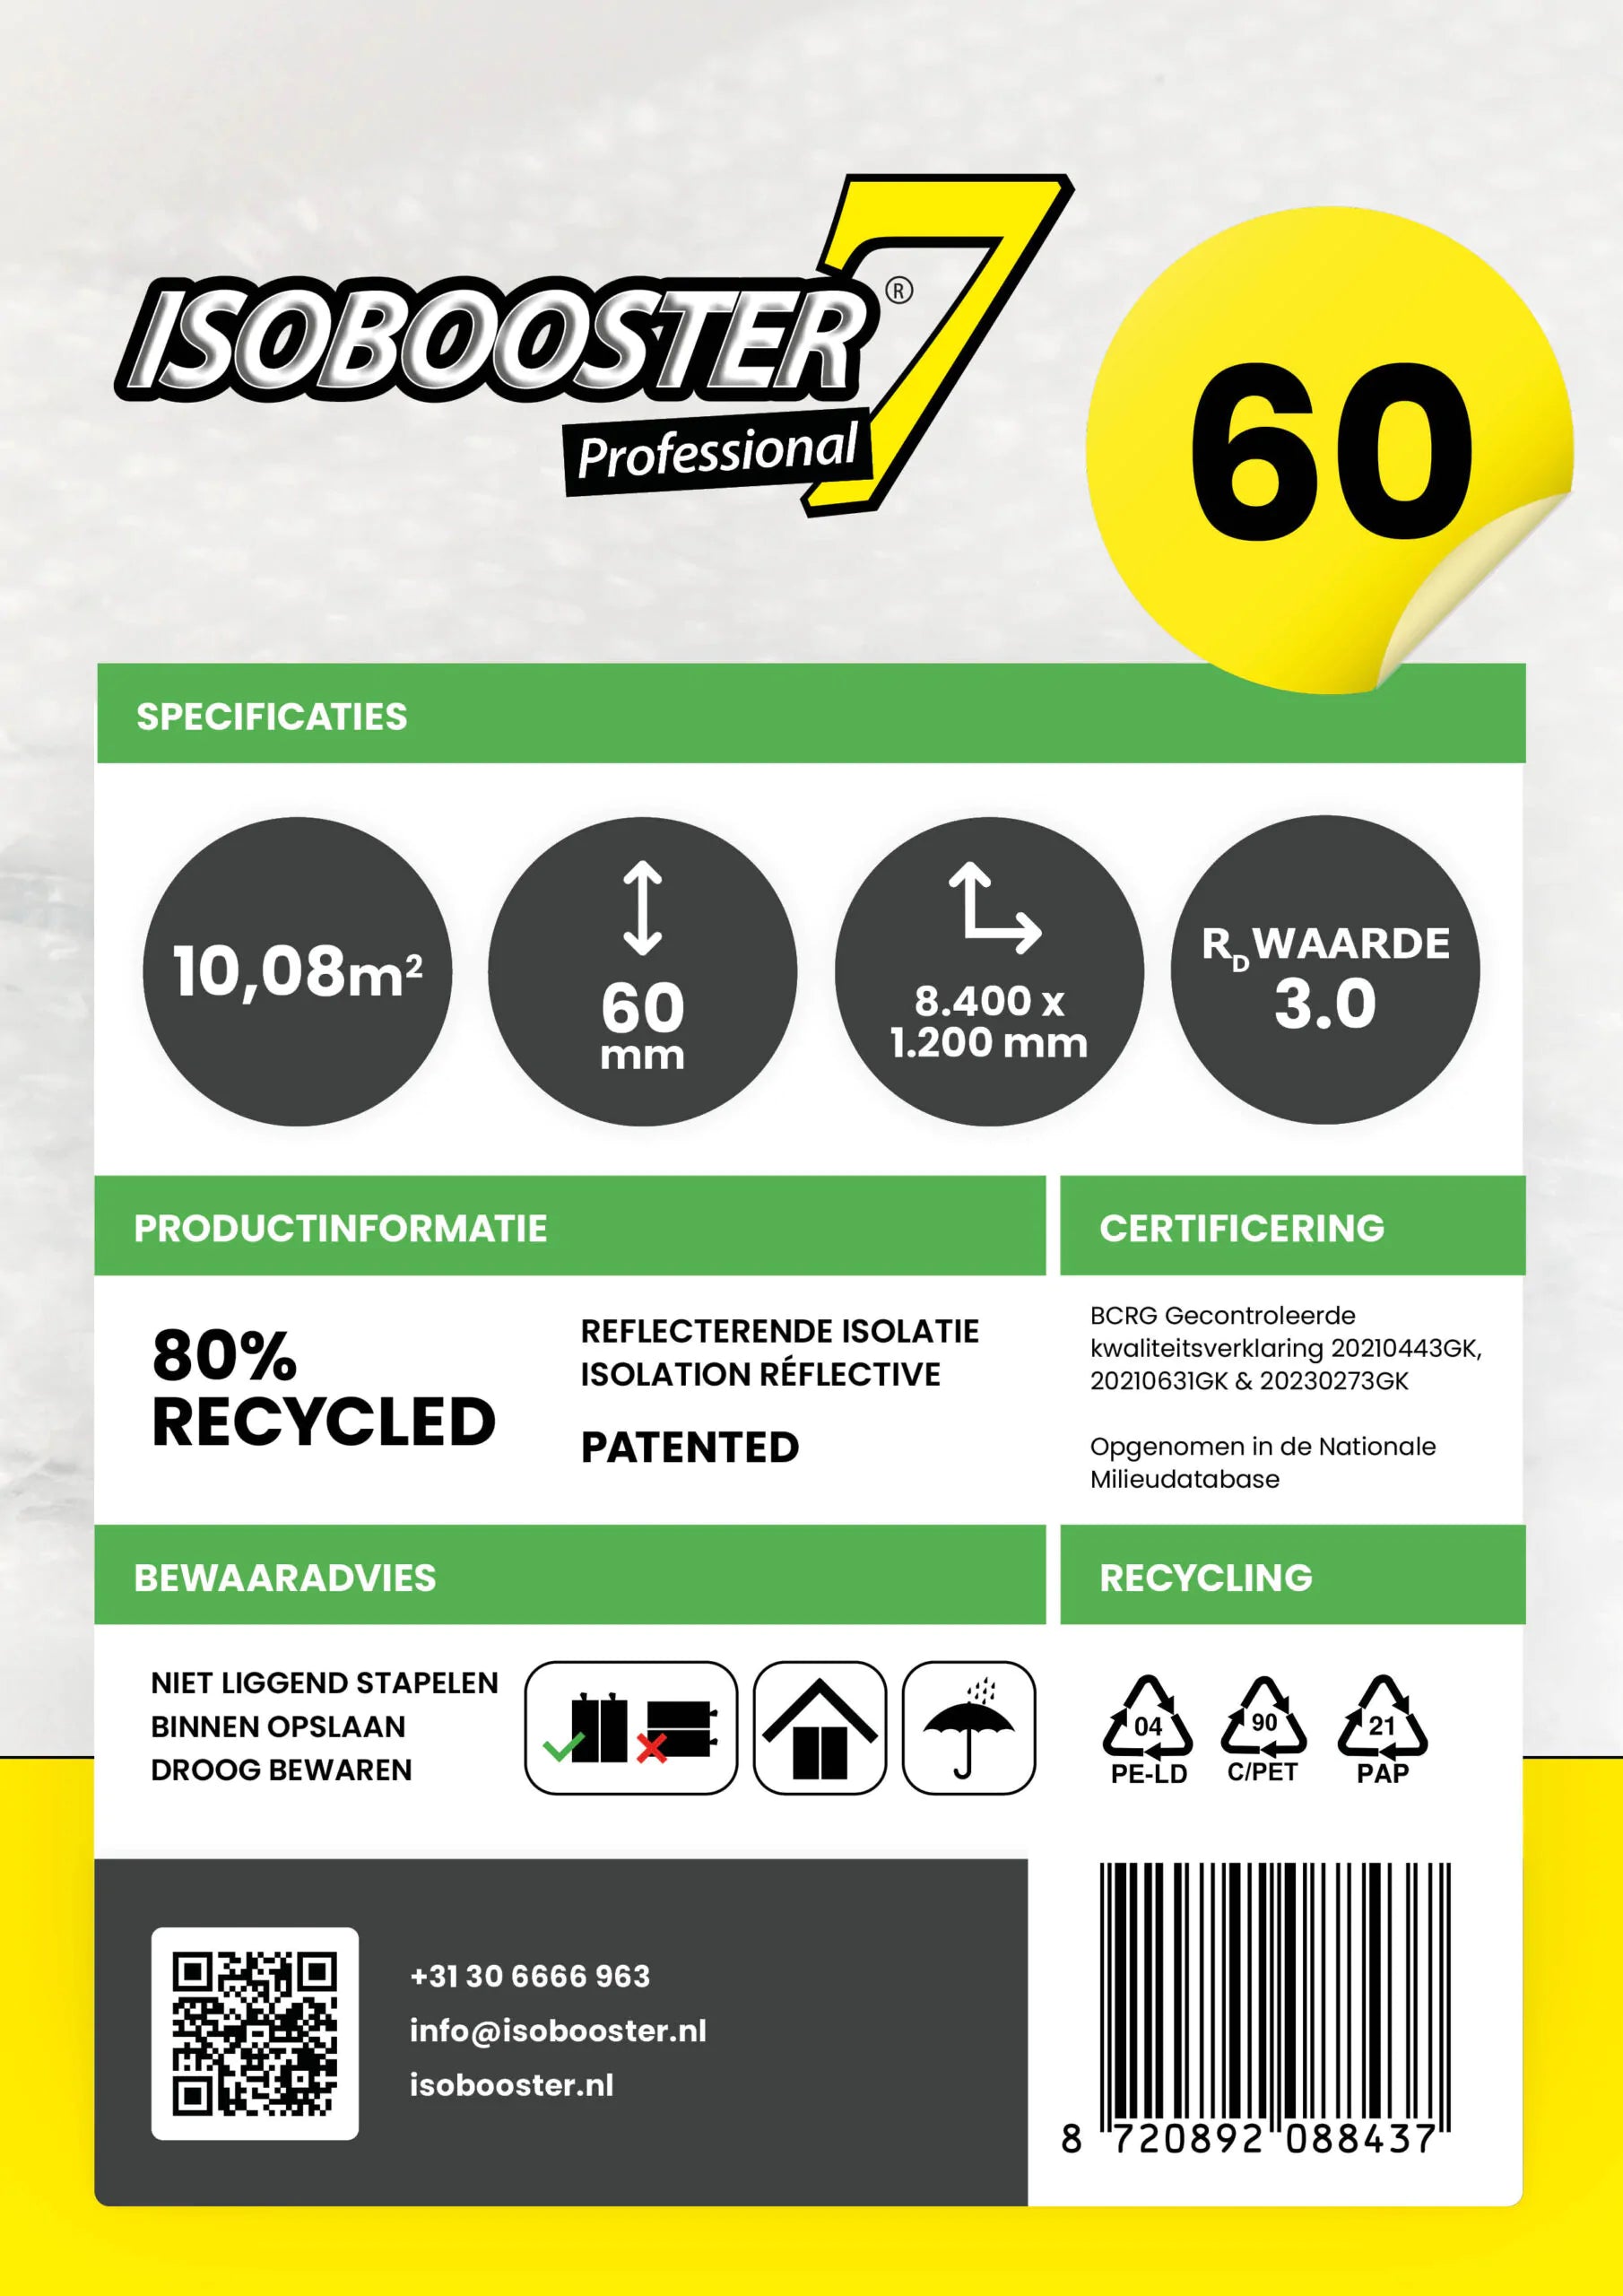 Isobooster Professionnel 60mm